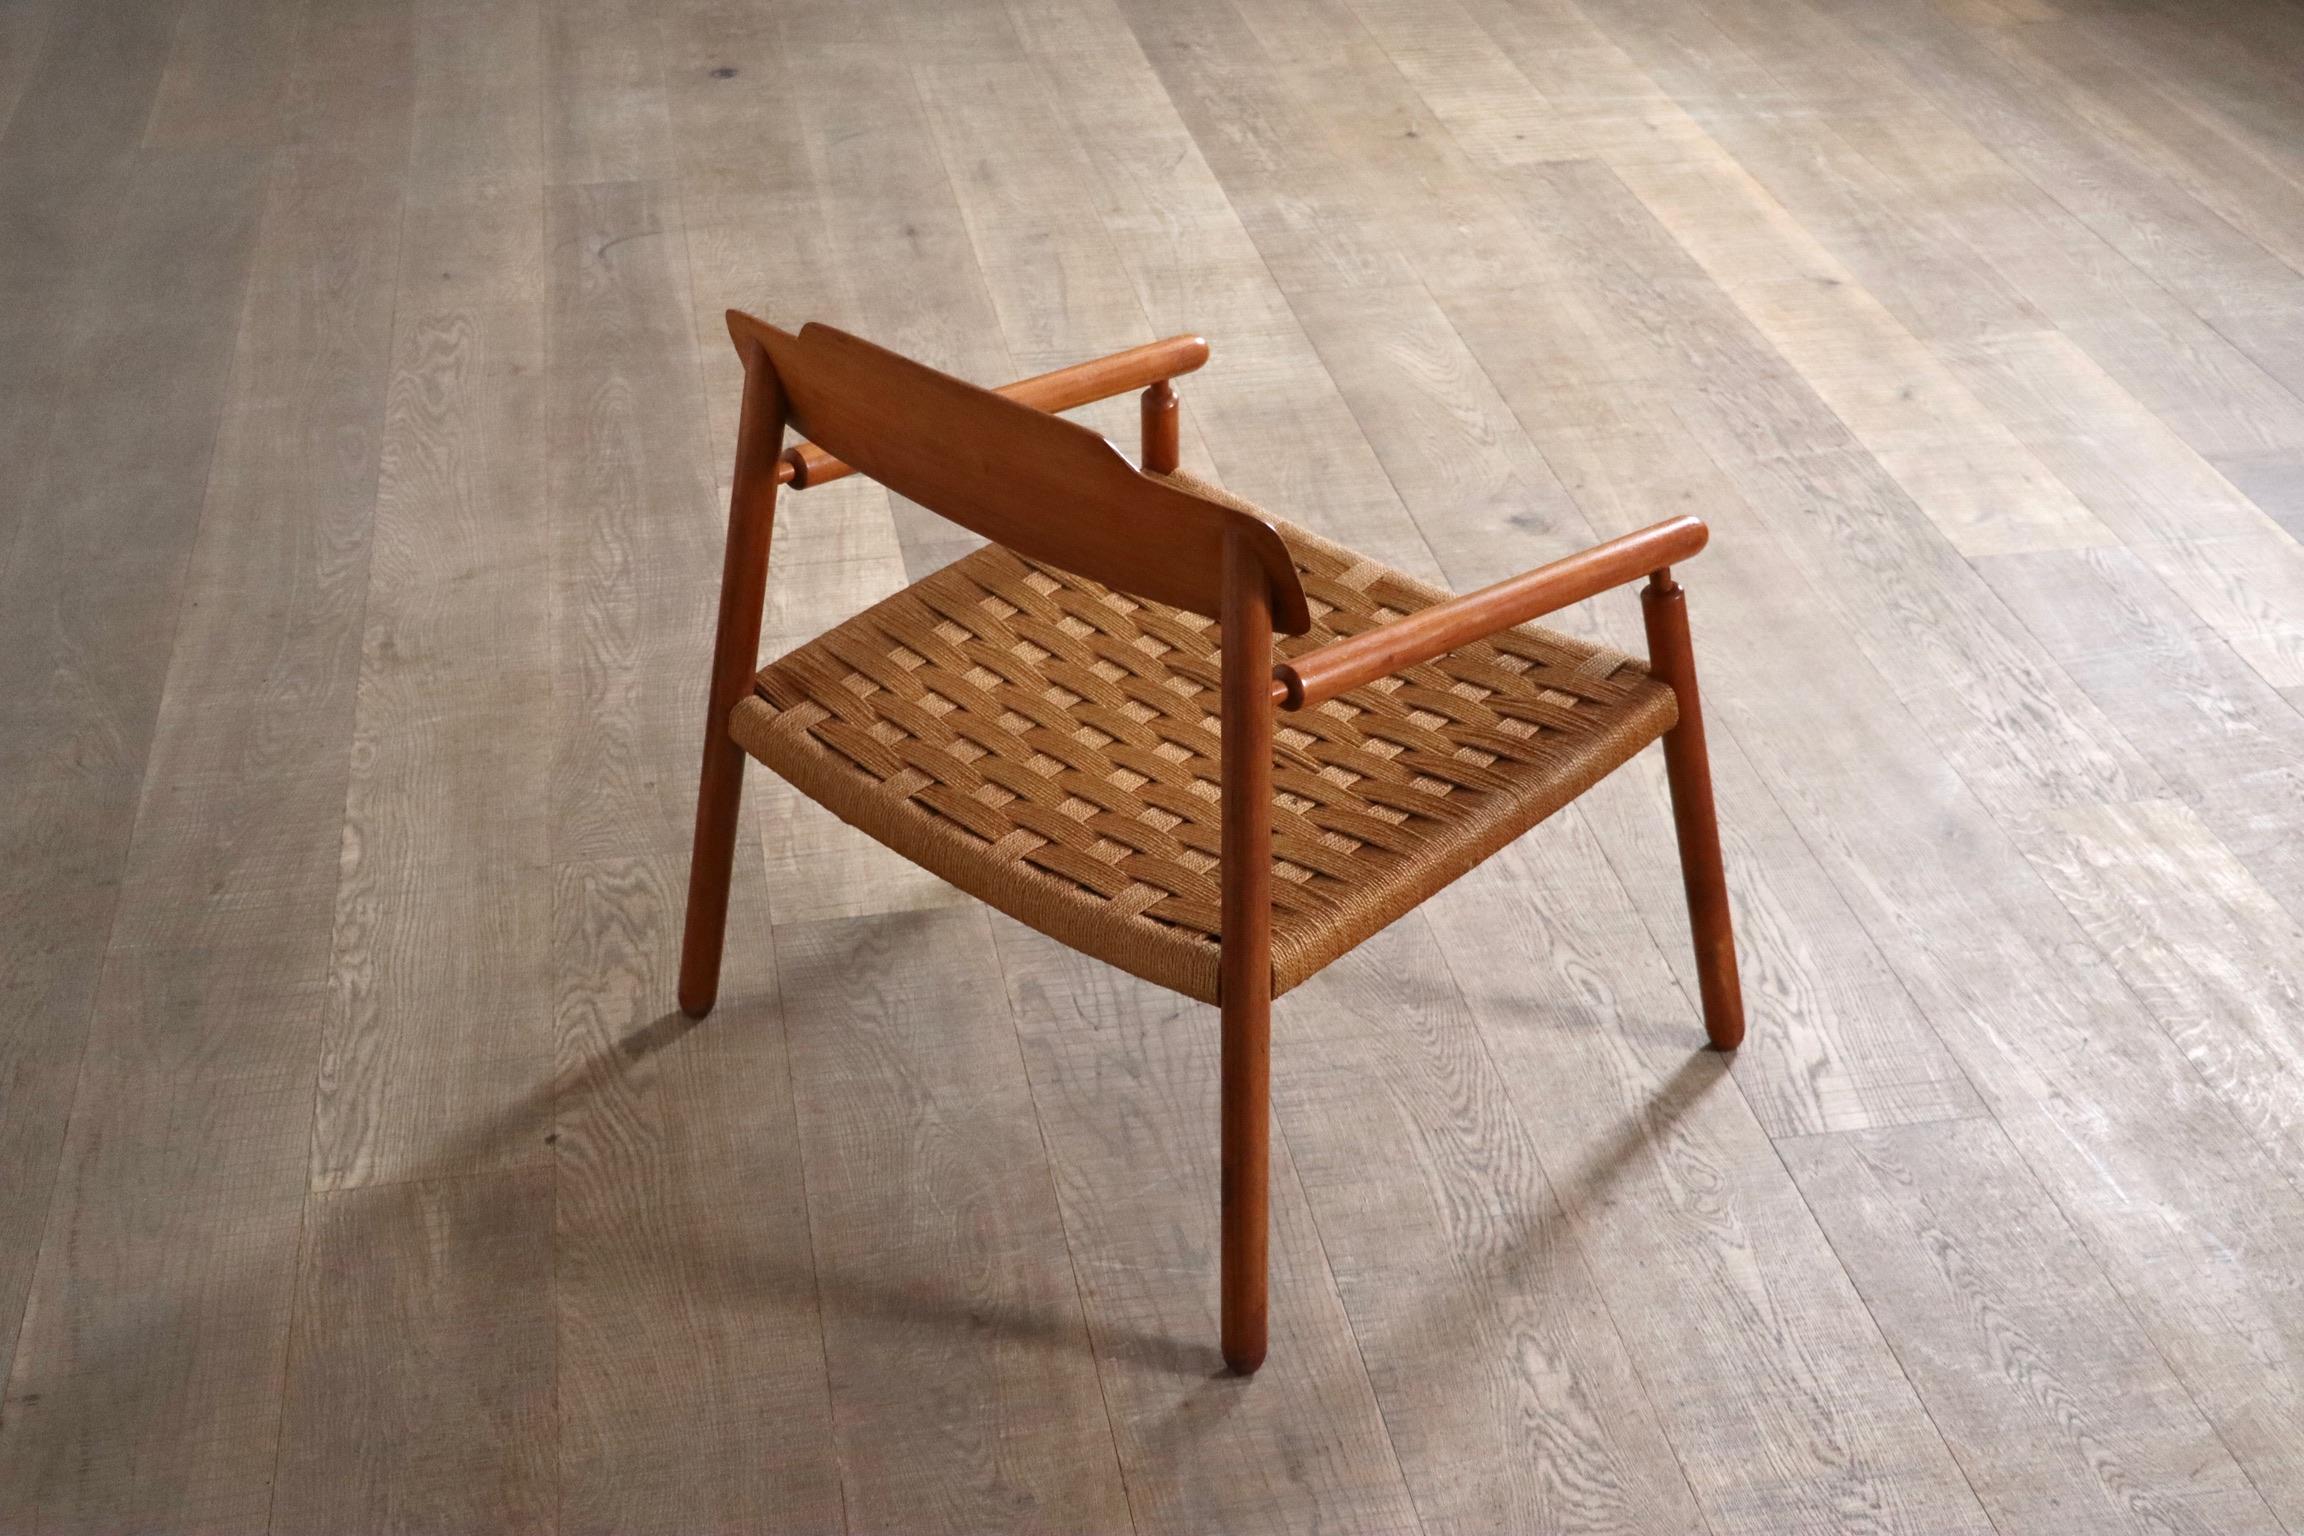 Midcentury Minimalistic Easy Chair In Oak And Papercord, Finland 1950s For Sale 1